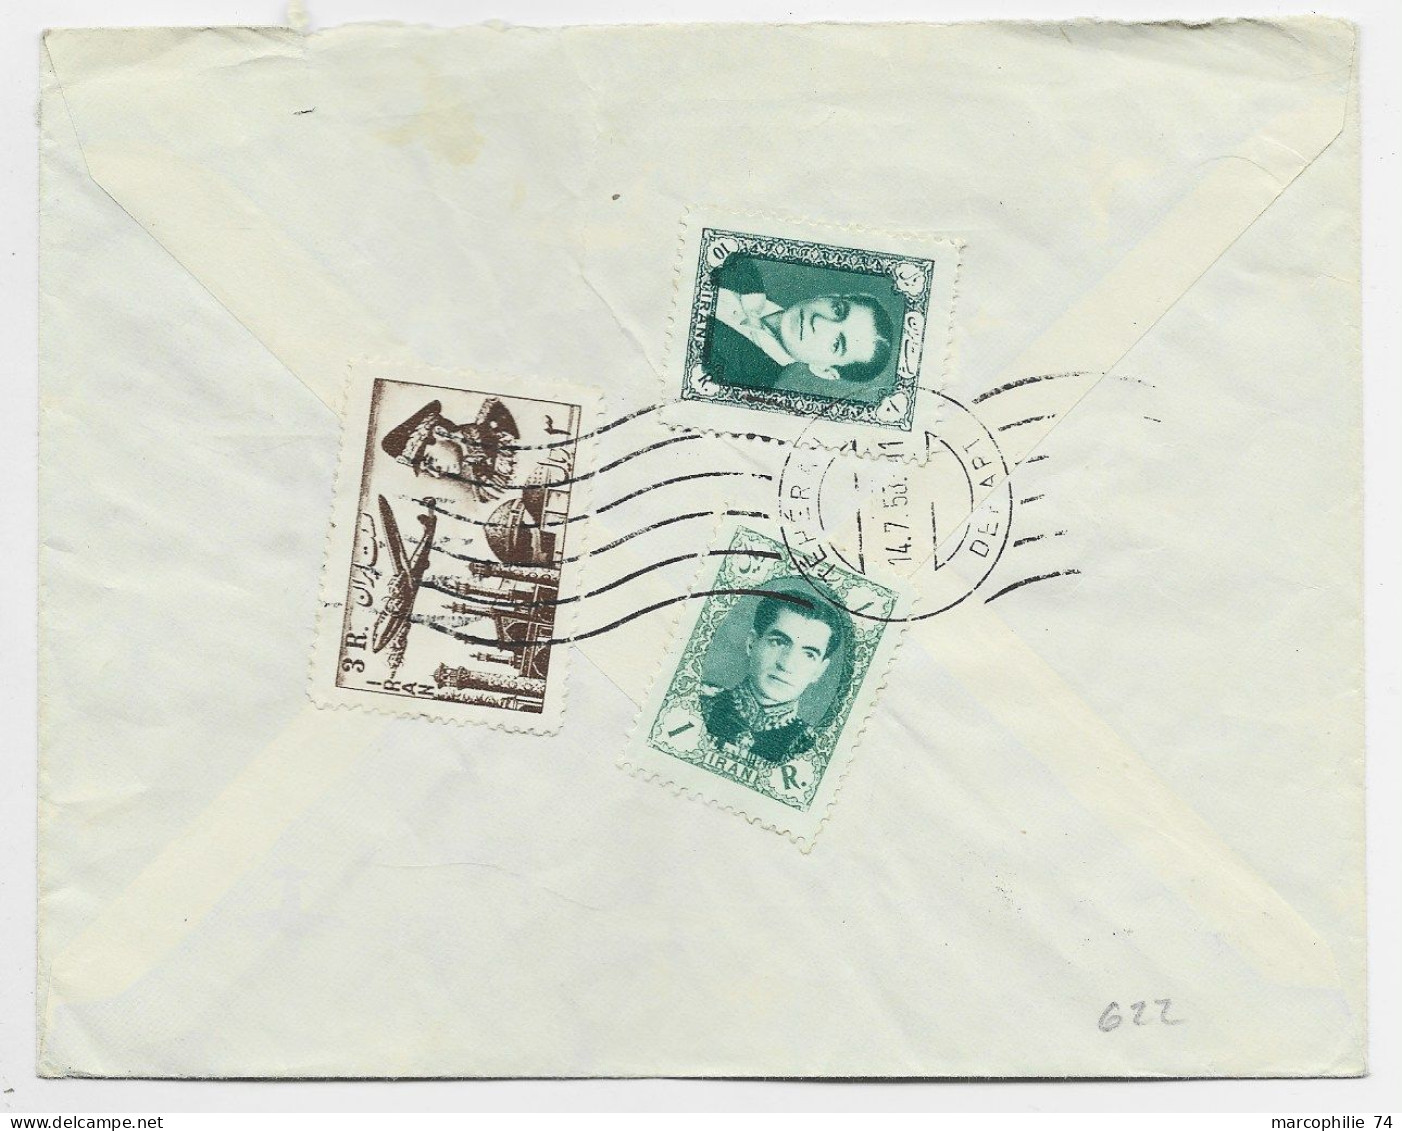 PERSIA 3R+1RX2 AU VERSO LETTRE COVER AIR MAIL LEVANT EXPRESS TRANSPORT TEHERAN IRAN 1958 TO SUISSE - Iran